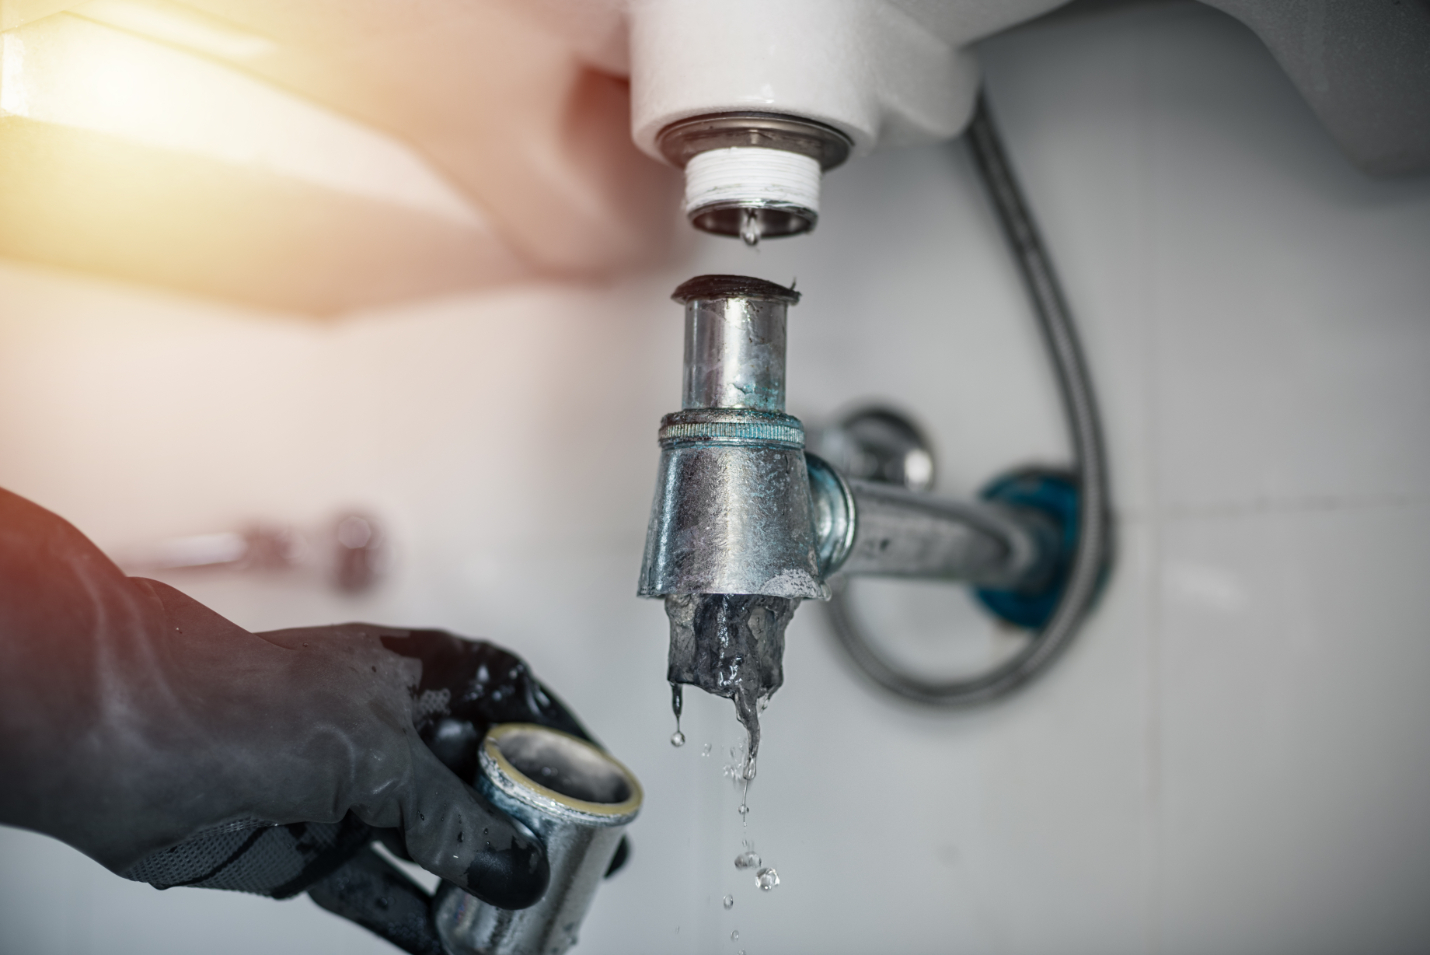 Plumbing Leaks and Clogs: A Mix of DIY and Professional Expertise